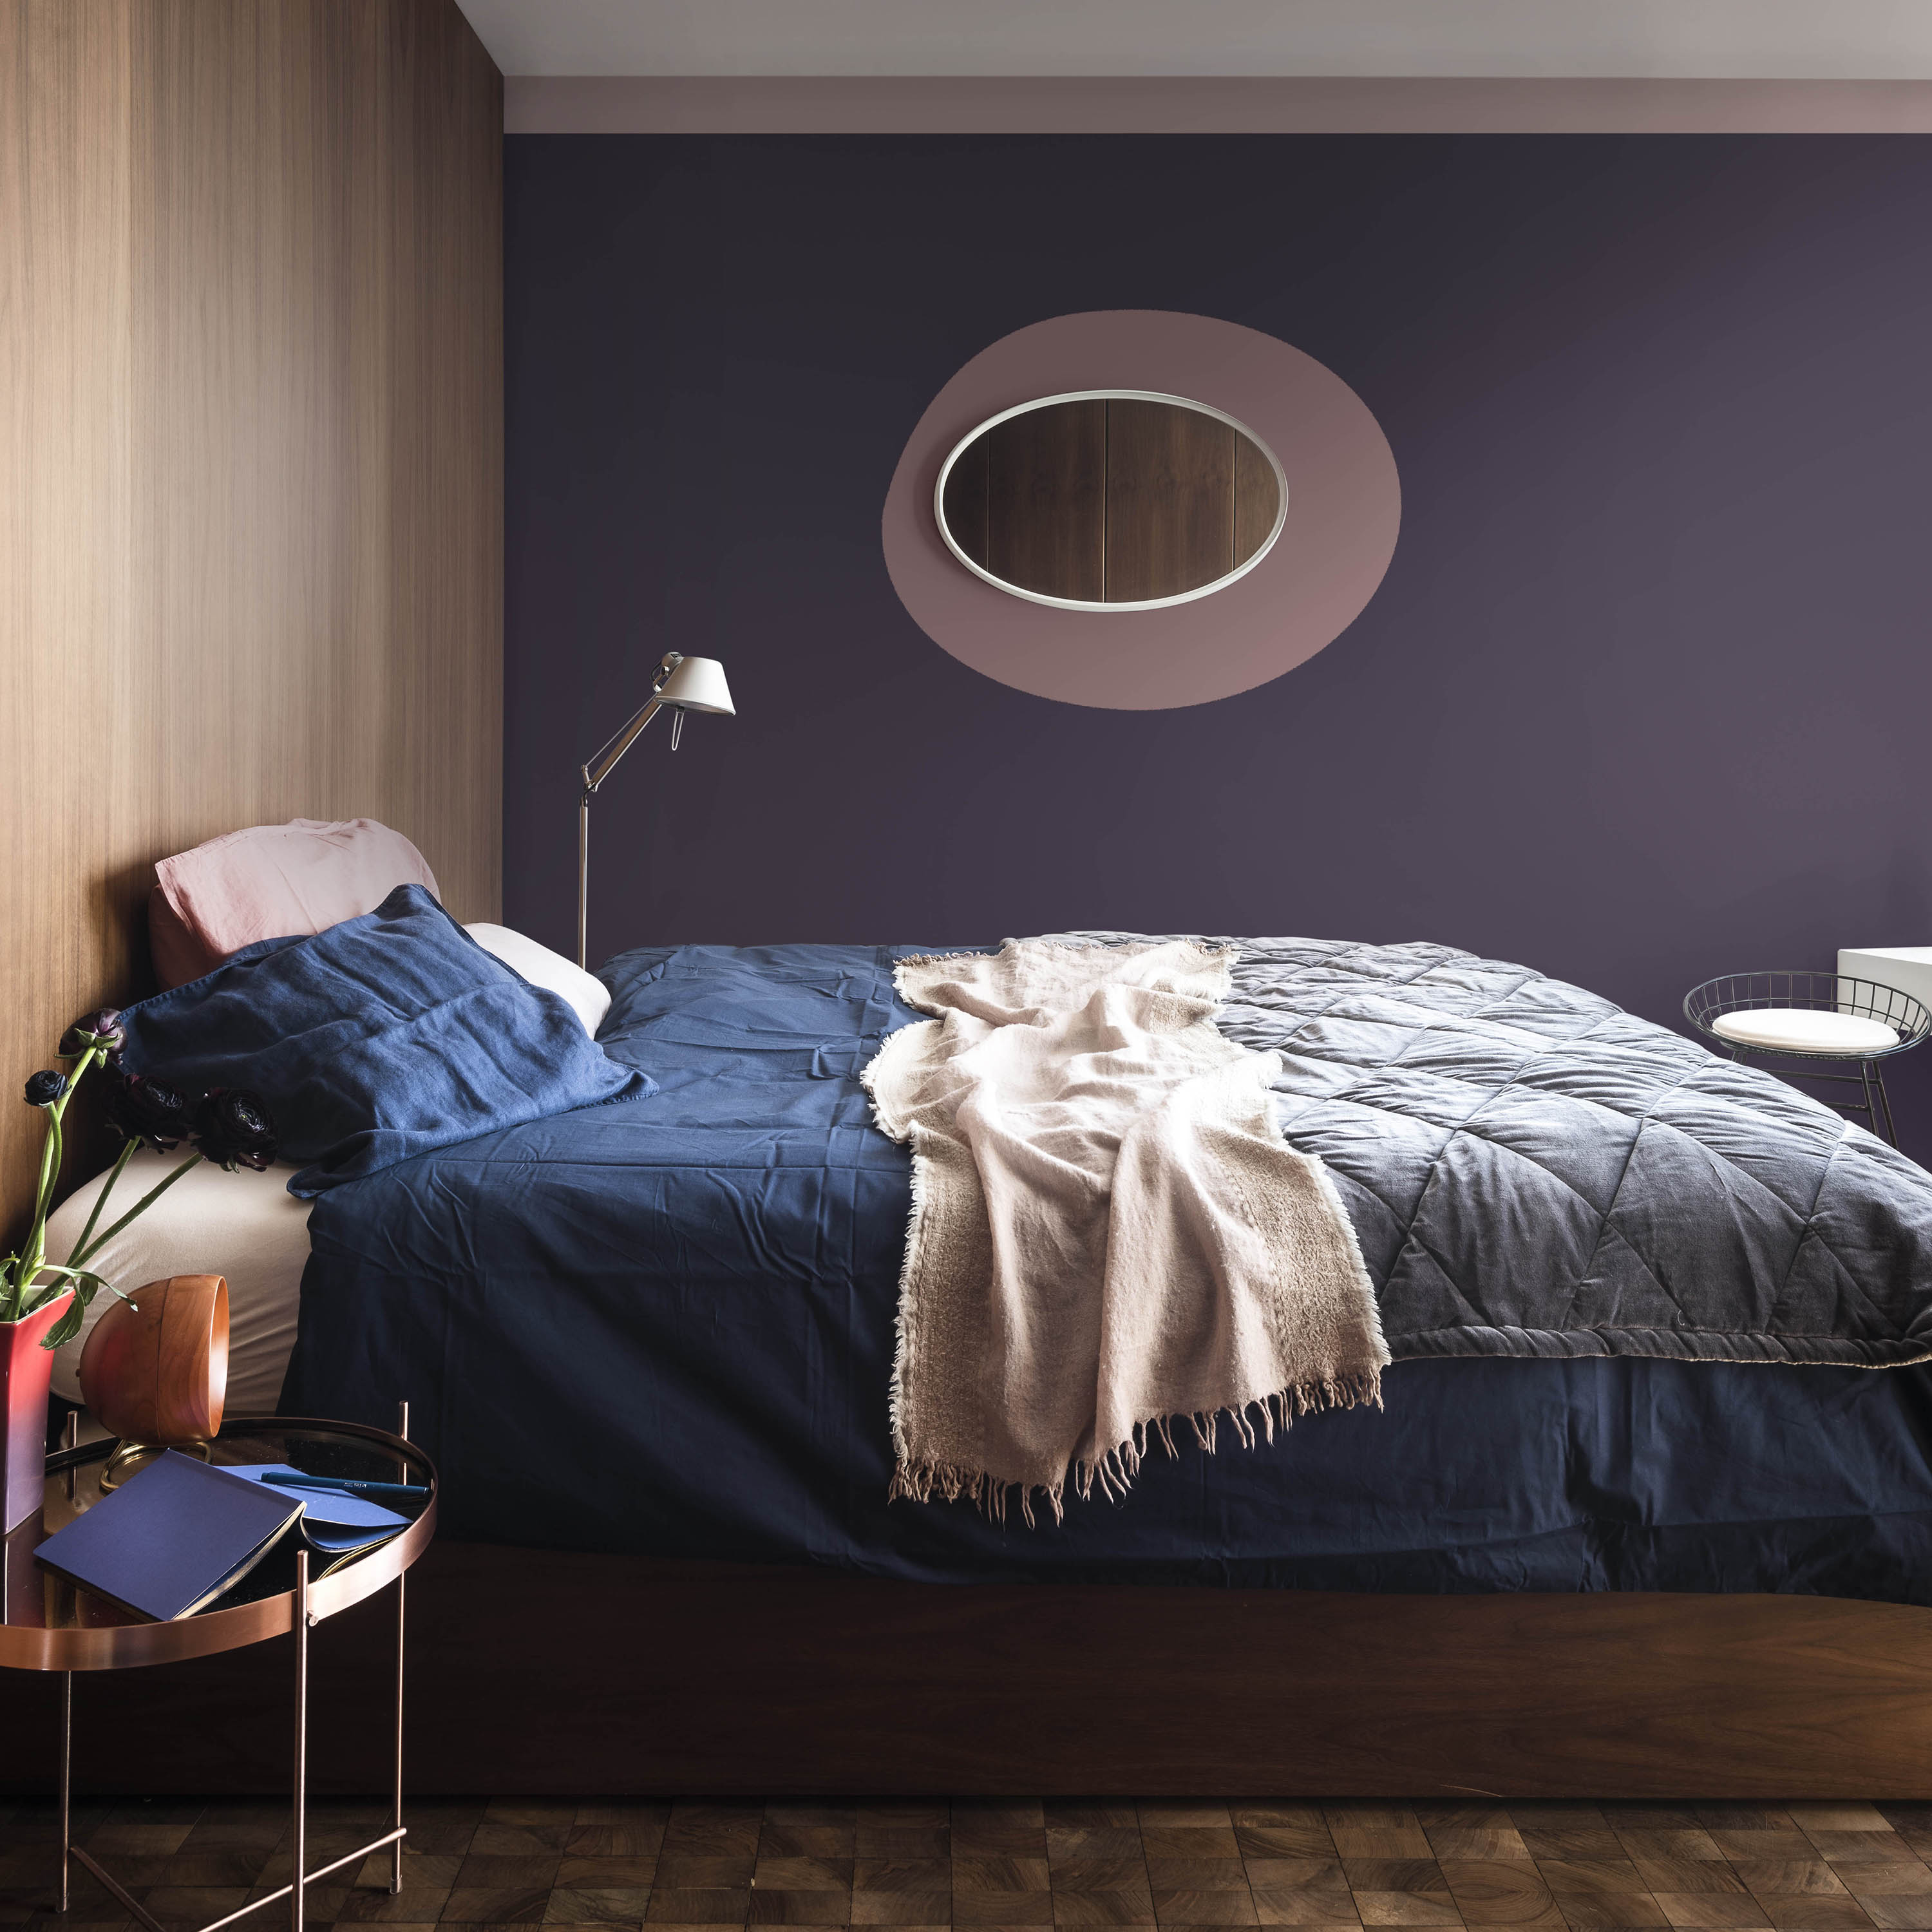 Dark purple bedroom with Heartwood and Blacberry Bush paints by Dulux and round oval mirror